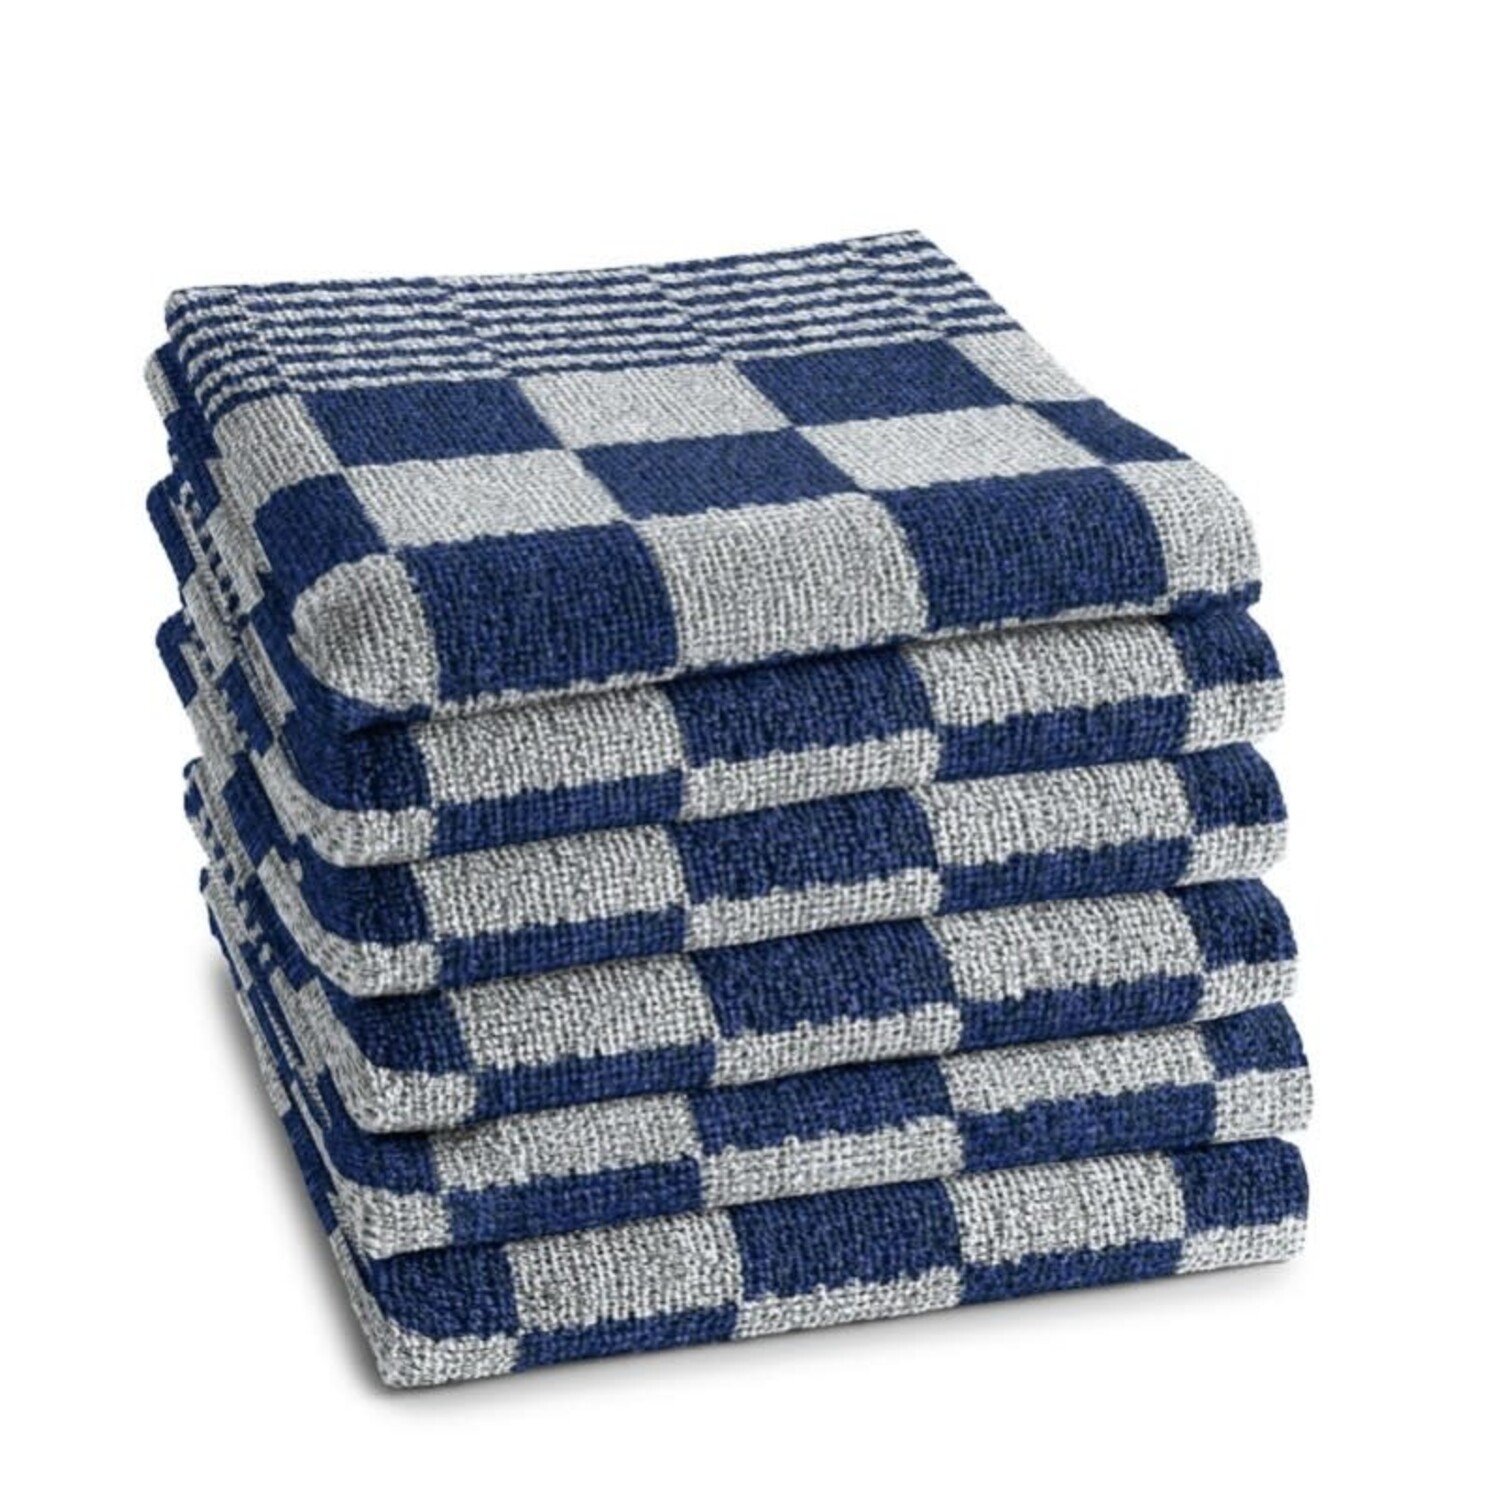 Hand Towels, The Classic Hand Towels